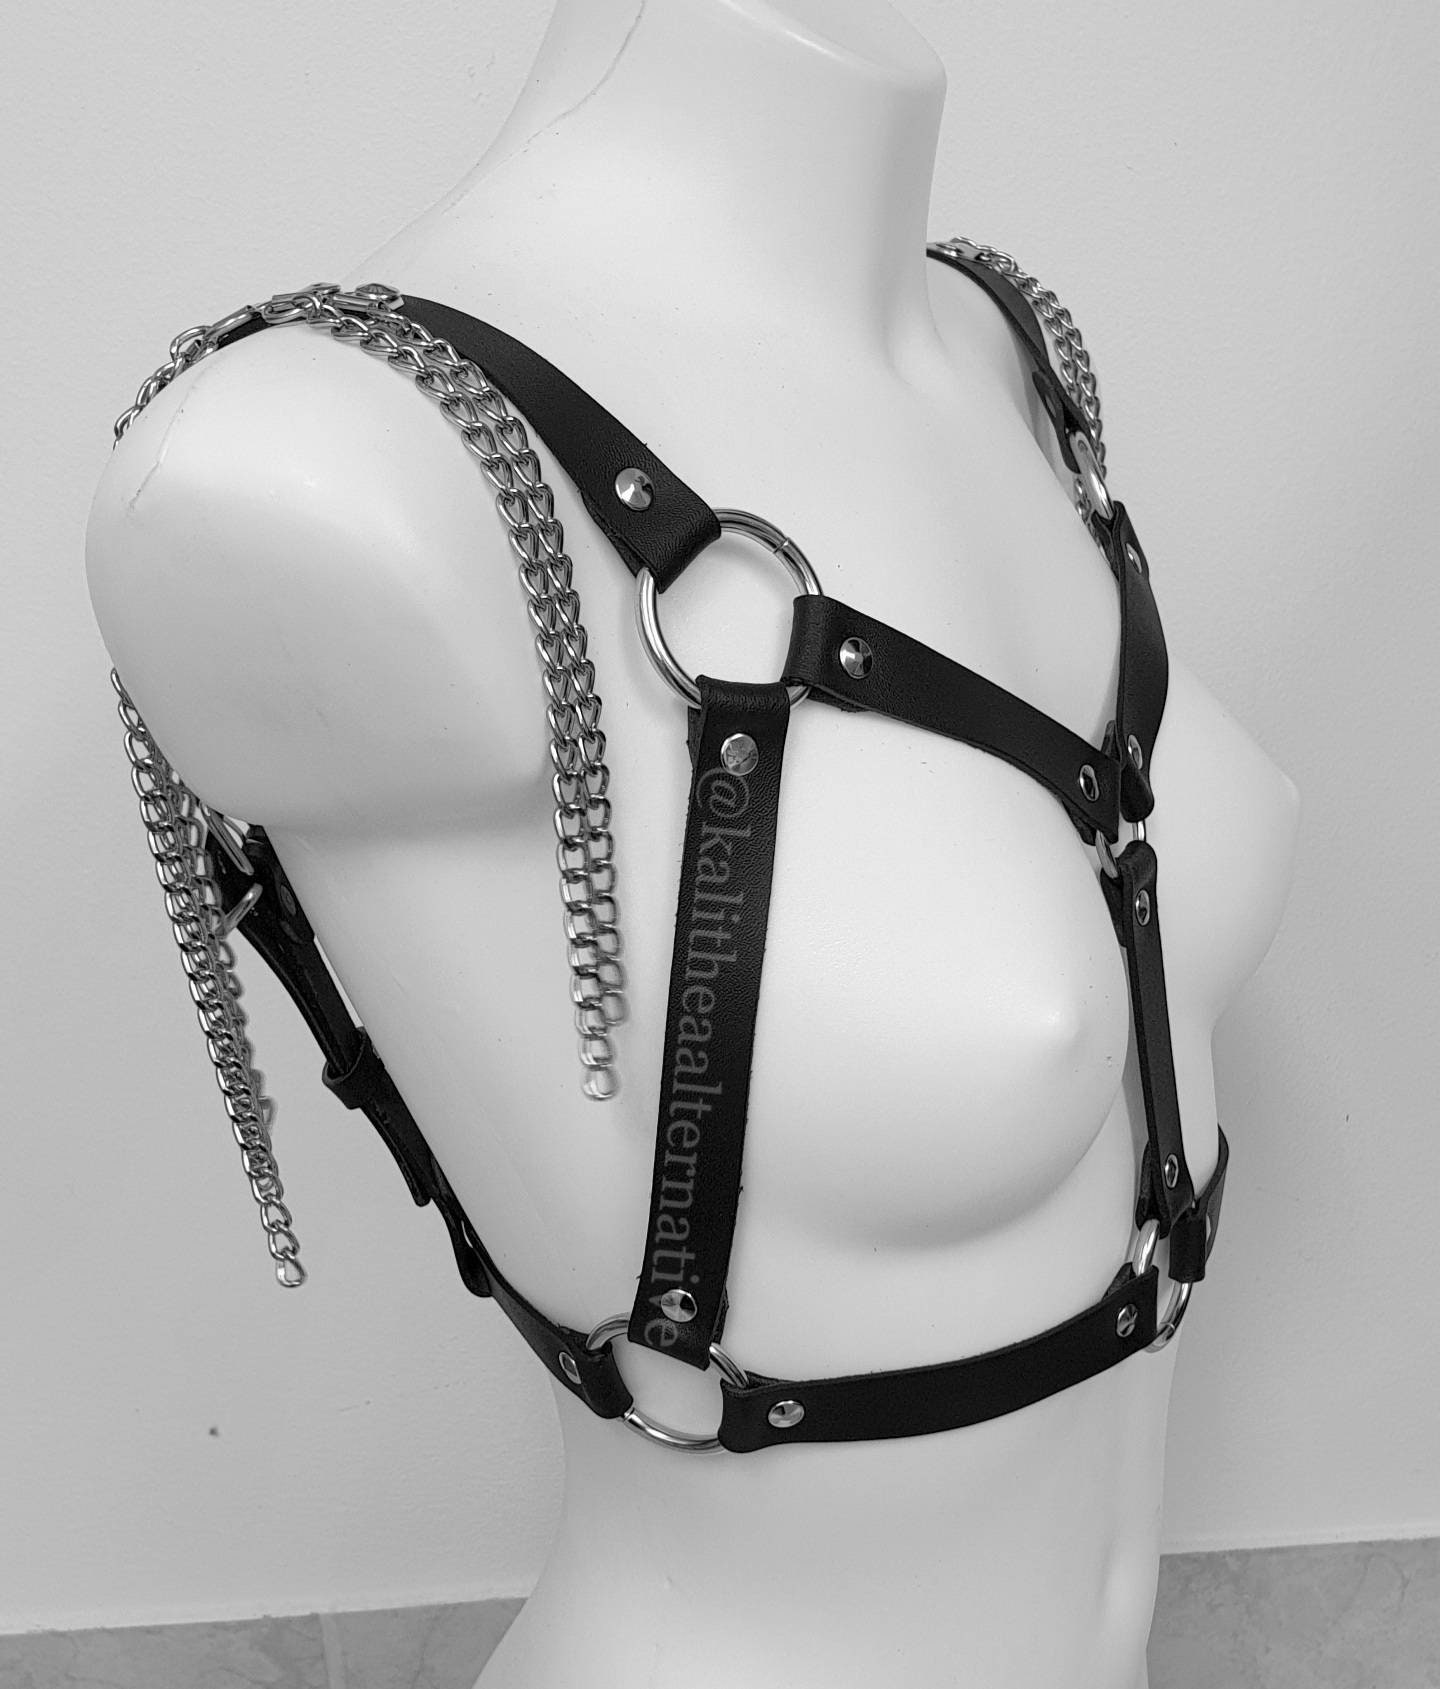 Caged Bra Party Leather Harness - Gothic Black Metal Harness photo